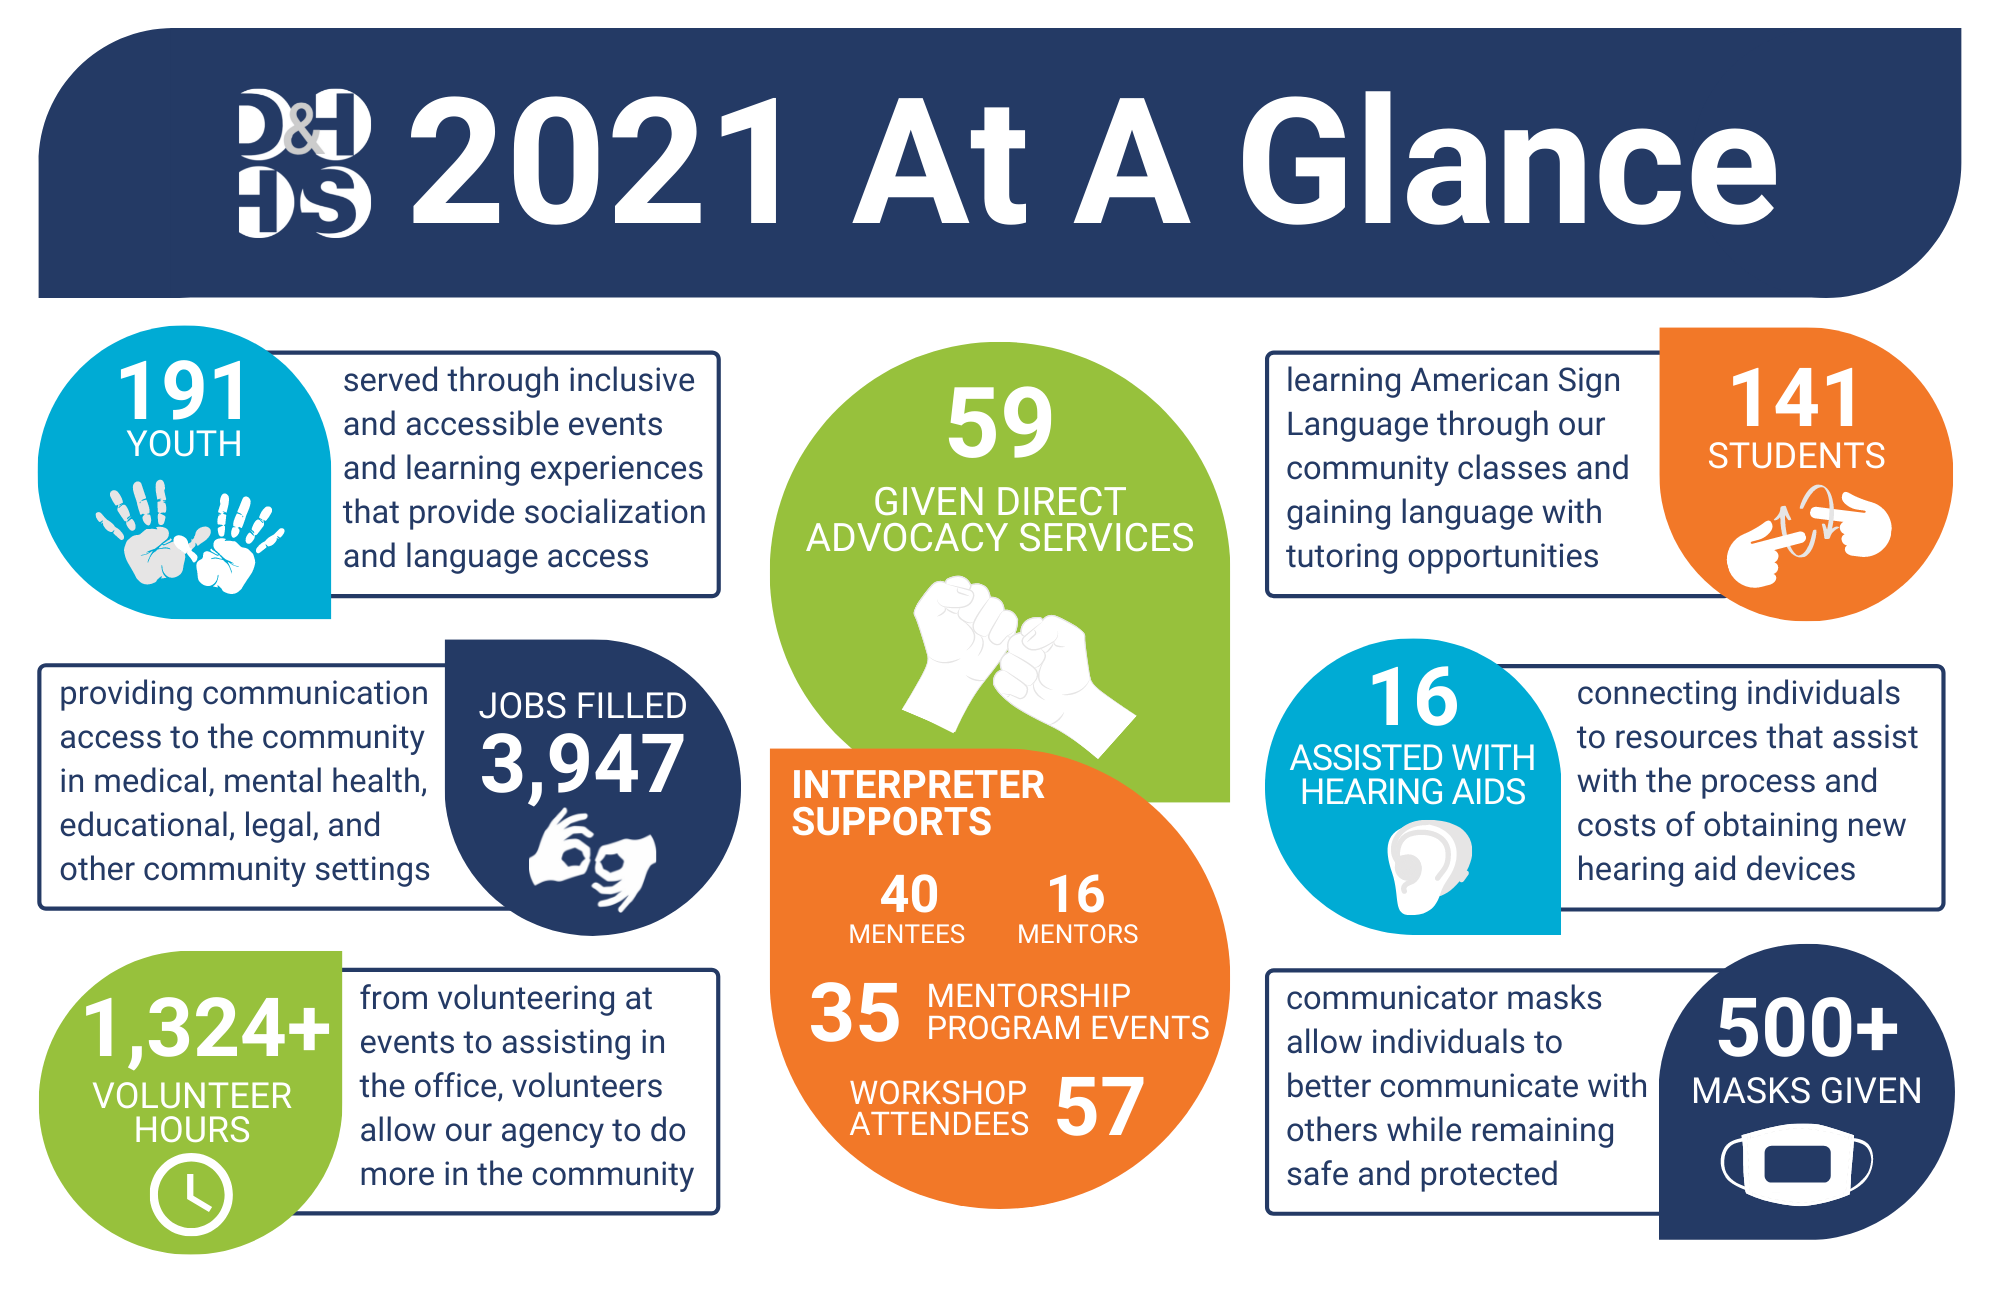 2021 At A Glance infographic reads: 191 youth served through inclusive and accessible events and learning experiences that provide socialization and language access. 3,947 jobs filled providing communication access to the community in medical, mental health, educational, legal, and other community settings. 1,324+ volunteer hours from volunteering at events to assisting in the office, volunteers allow our agency to do more in the community. 59 given direct advocacy services. Interpreter Supports: 40 mentees, 16 mentors, 35 mentorship program events, 57 workshop attendees. 141 students learning American Sign Language through our community classes and gaining language with tutoring opportunities. 16 assisted with hearing aids connecting individuals to resources that assist with the process and costs of obtaining new hearing aid devices. 500+ masks given communicator masks allow individuals to better communicate with others while remaining safe and protected.